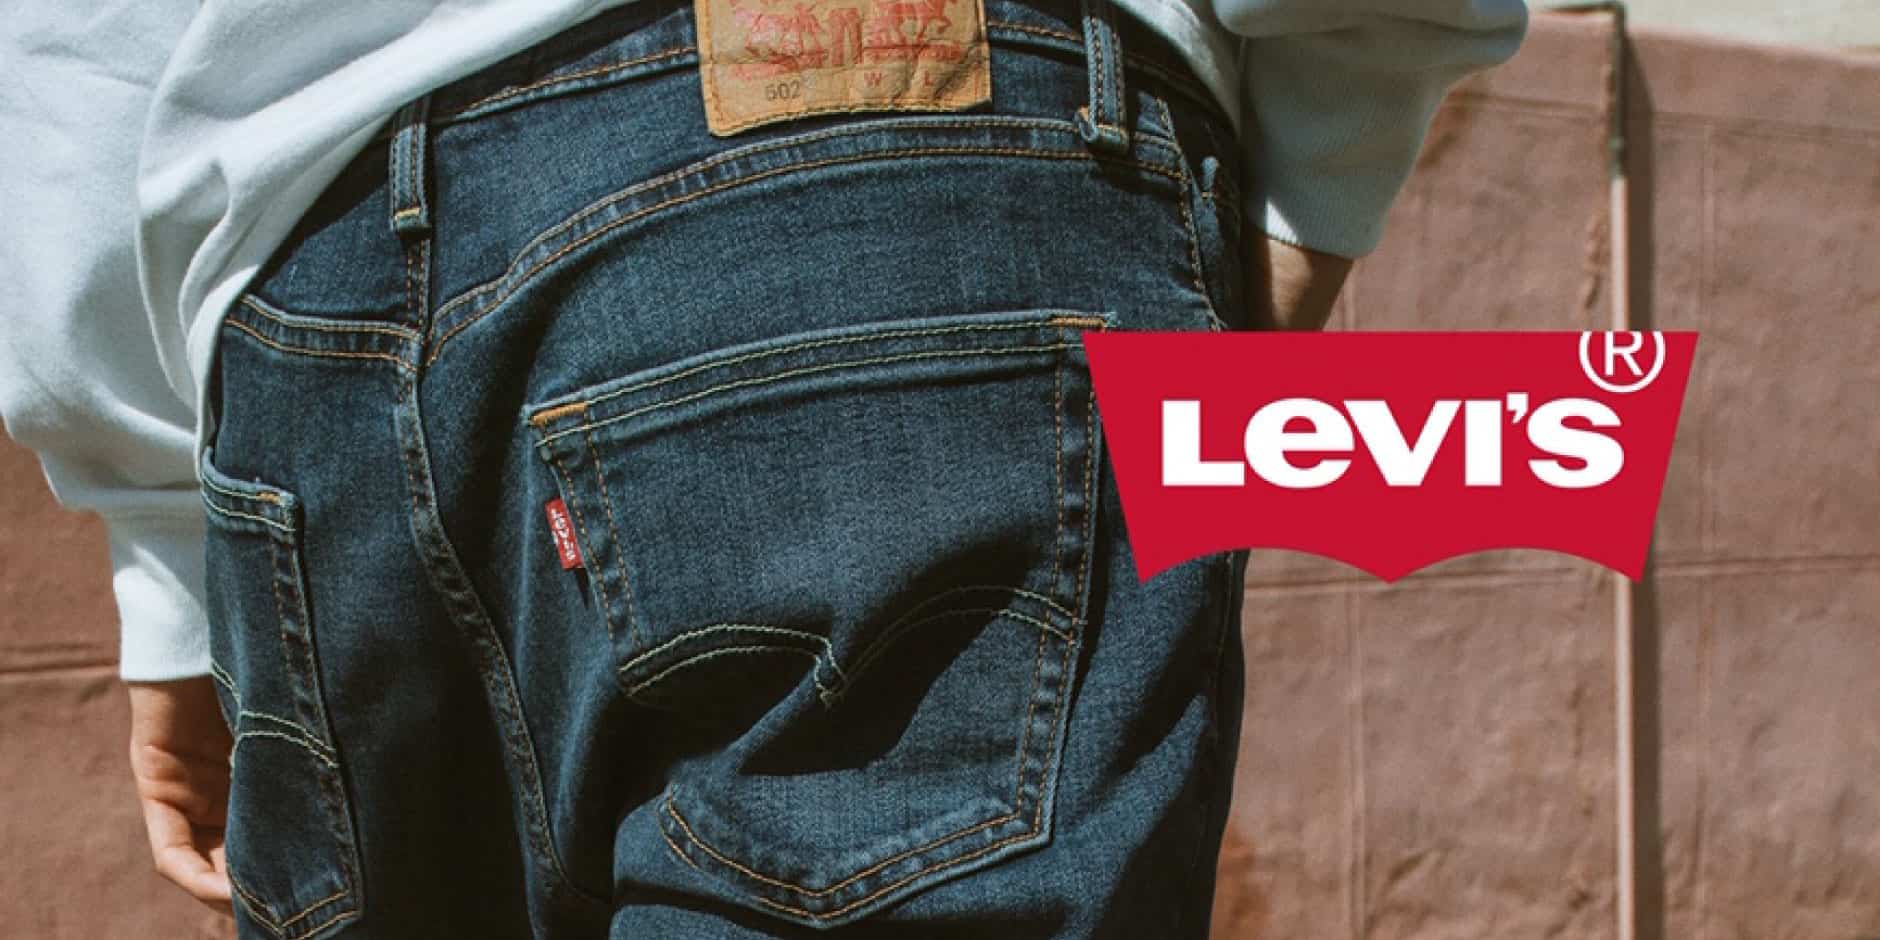 most branded jeans